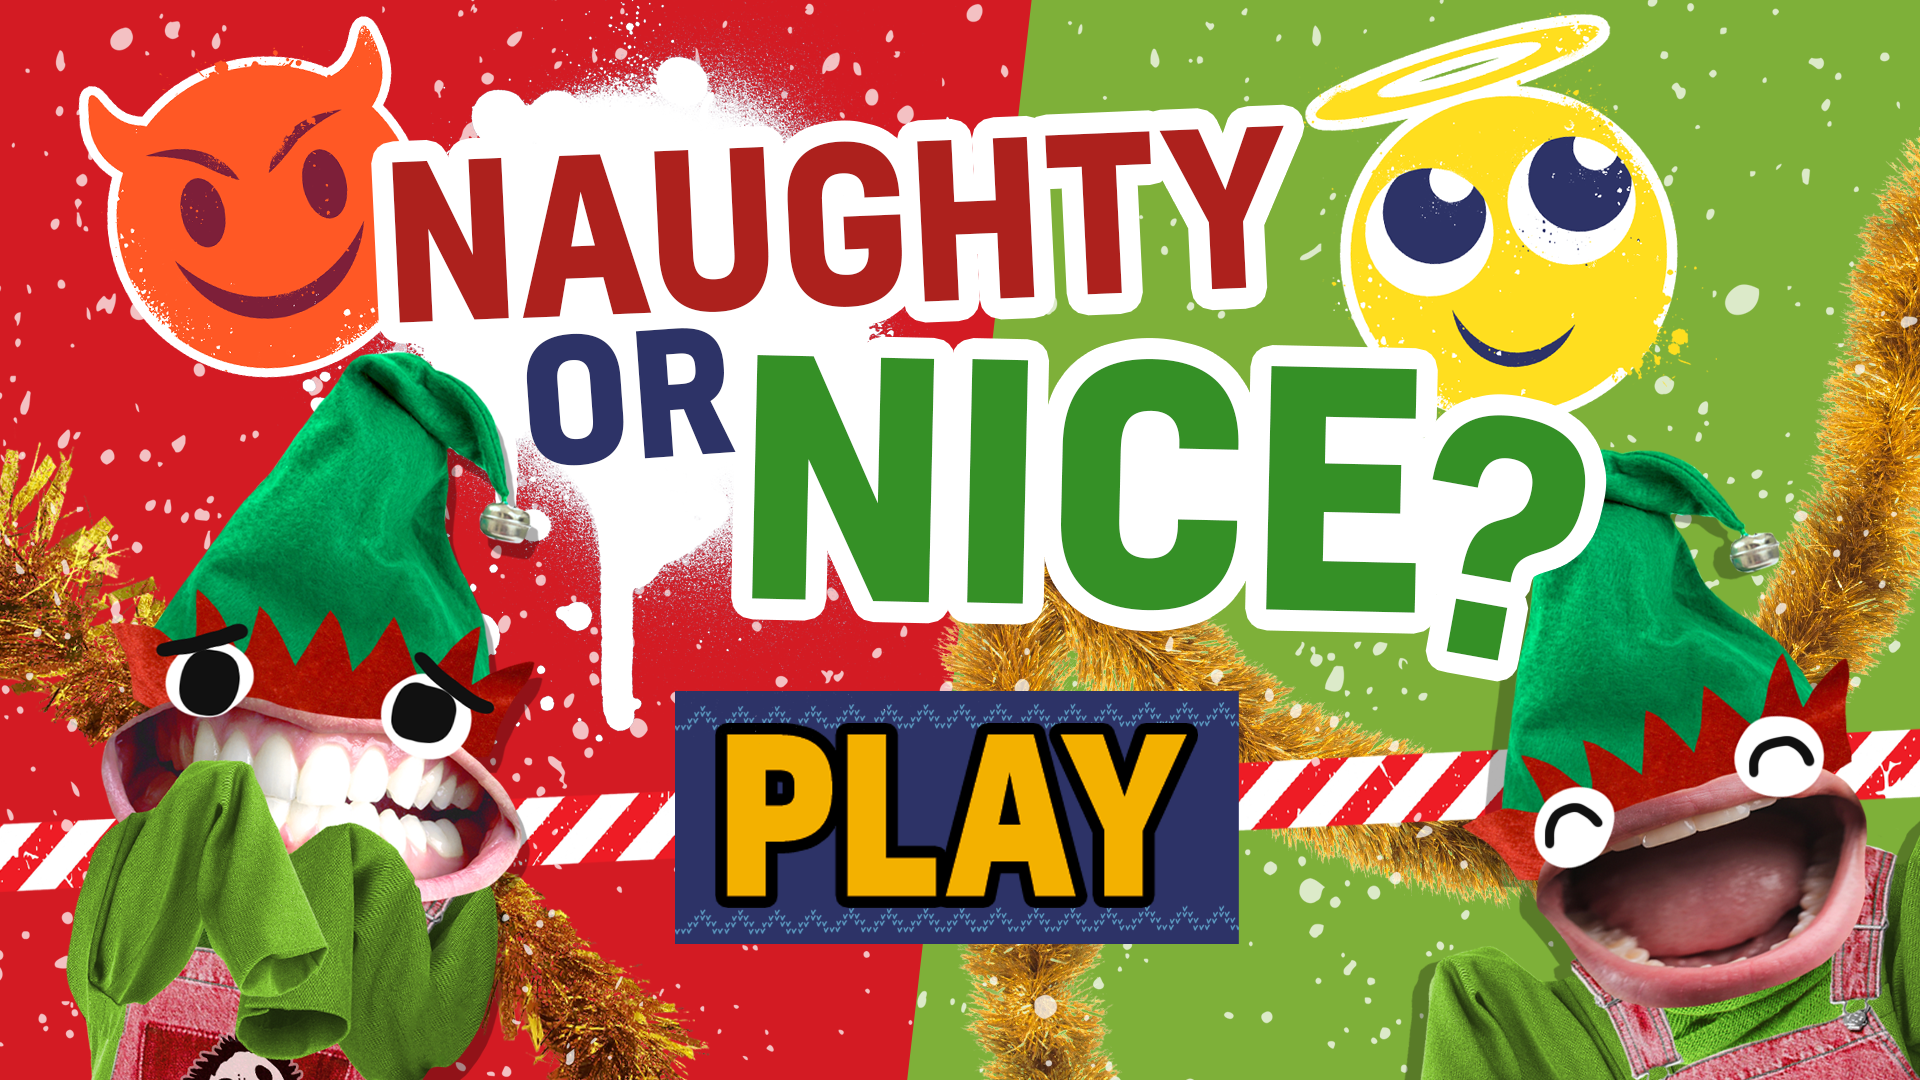 Are you ready to play Naughty or Nice?